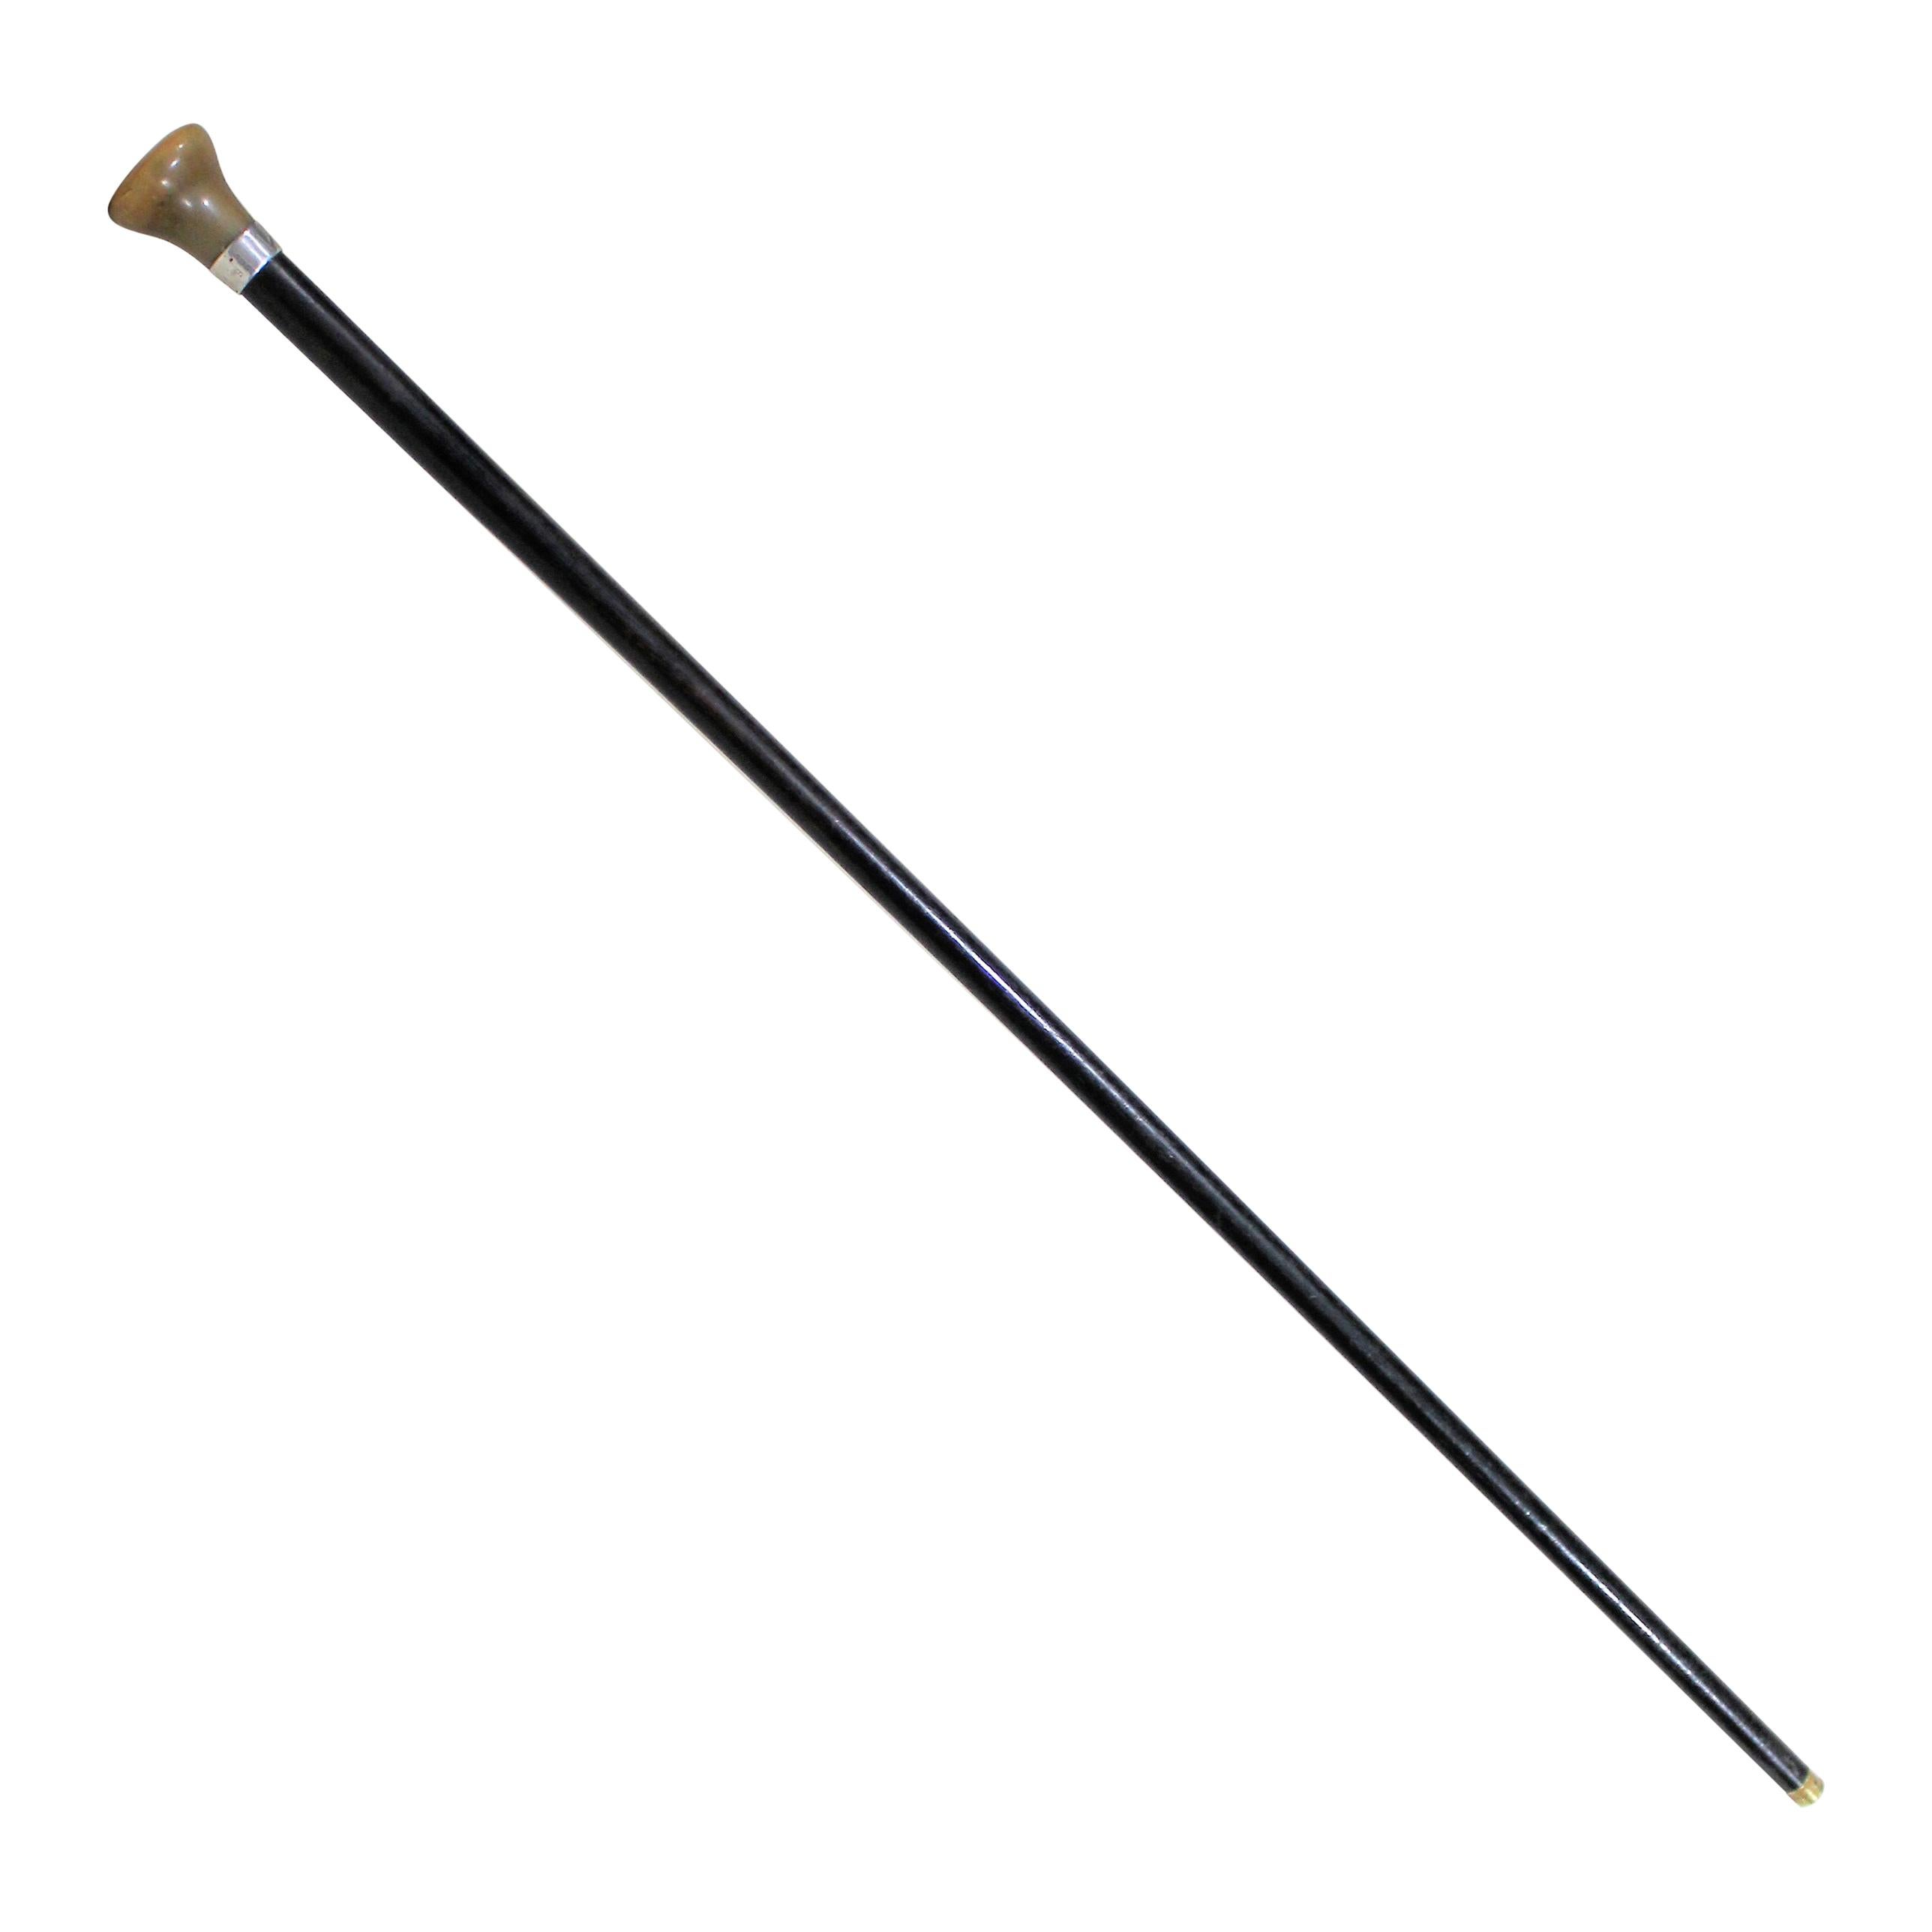 Flicker dagger walking stick cane. Concealed within a walking stick is a sleek and lethal stiletto dagger. Known by collectors as flickers, the blade is revealed when the user gives the stick a quick, sharp flick, allowing the dagger to emerge. Made